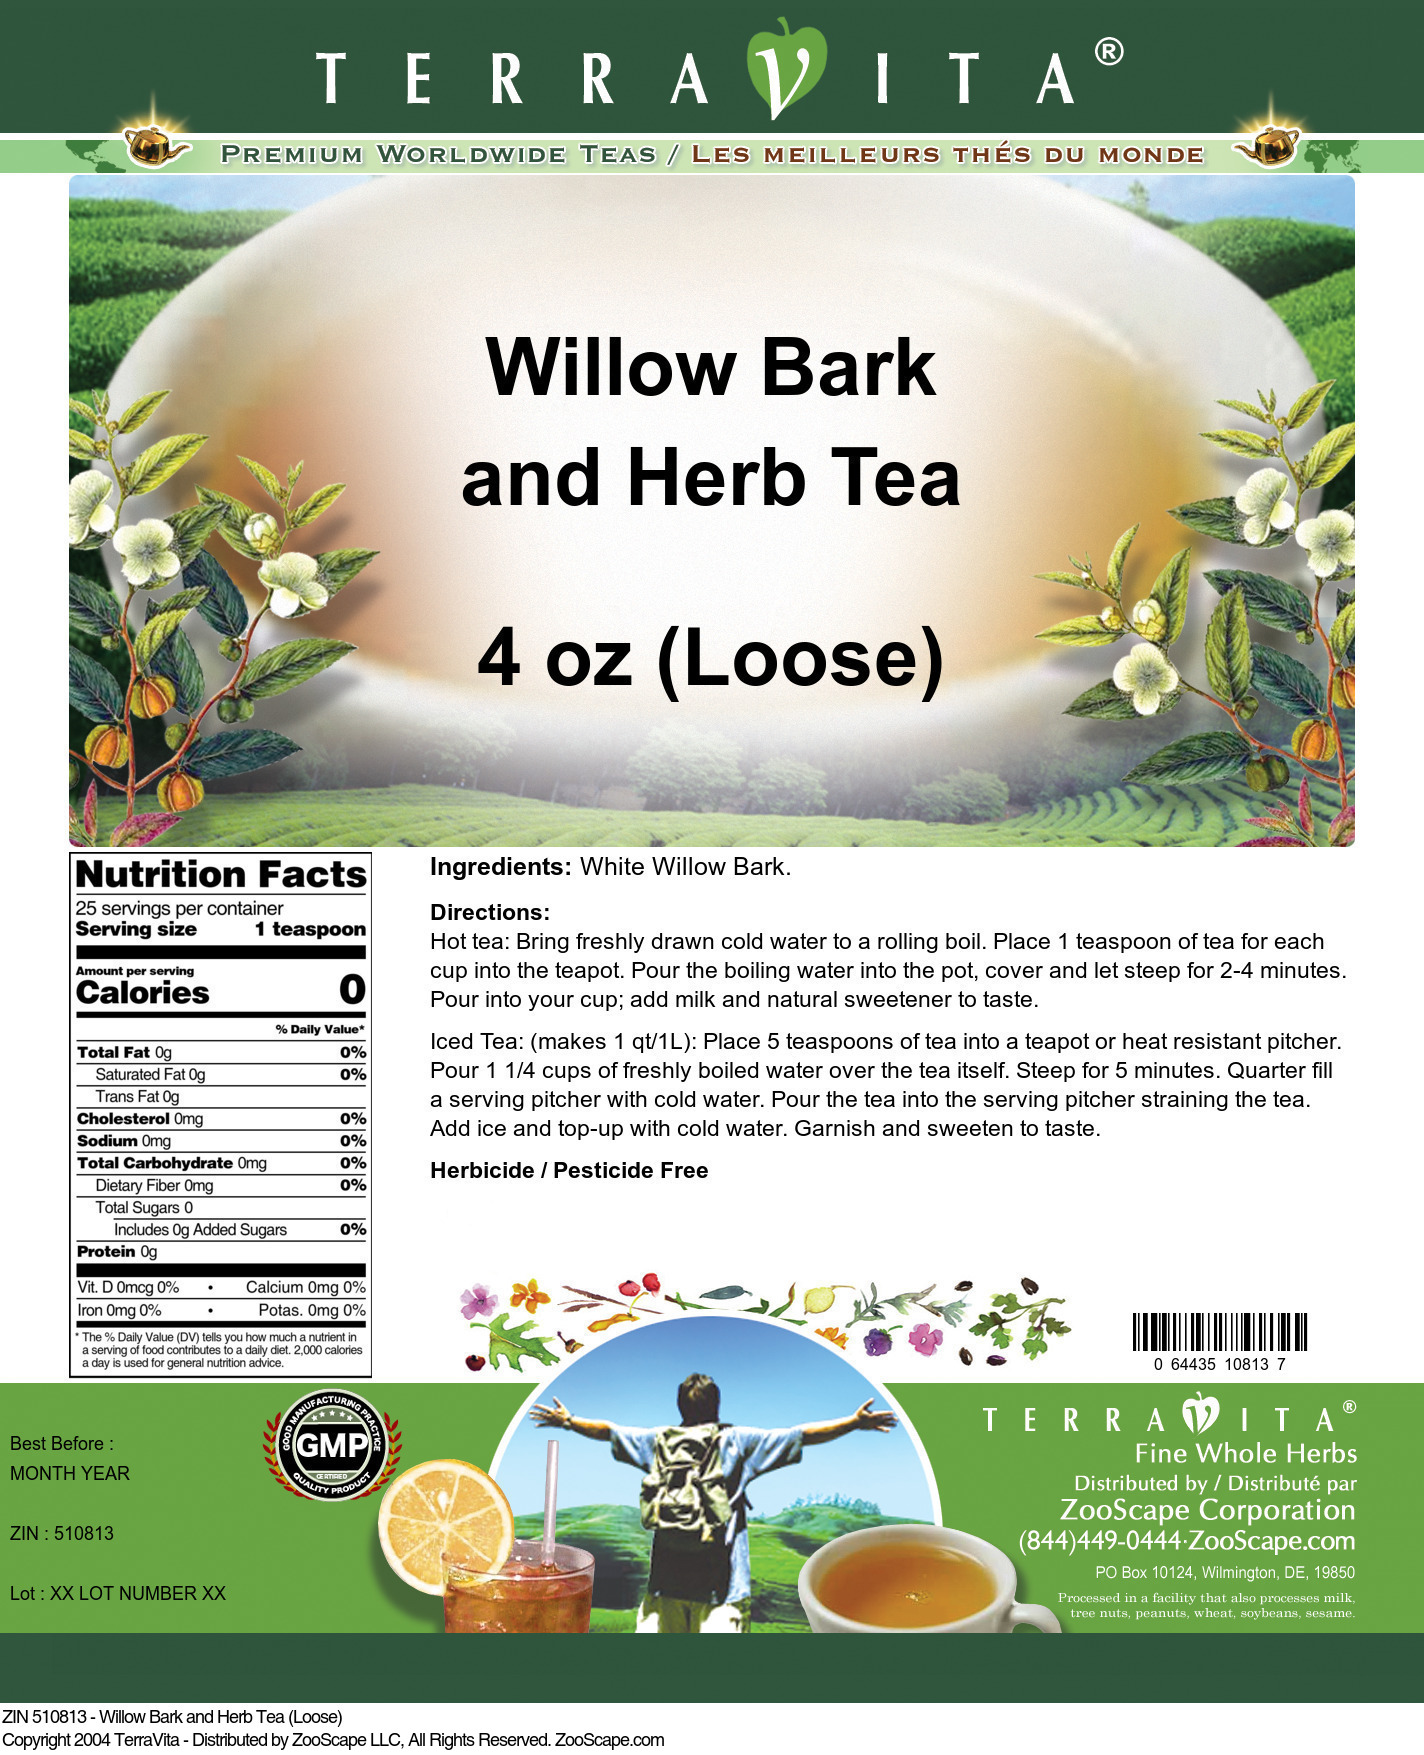 Willow Bark and Herb Tea (Loose) - Label